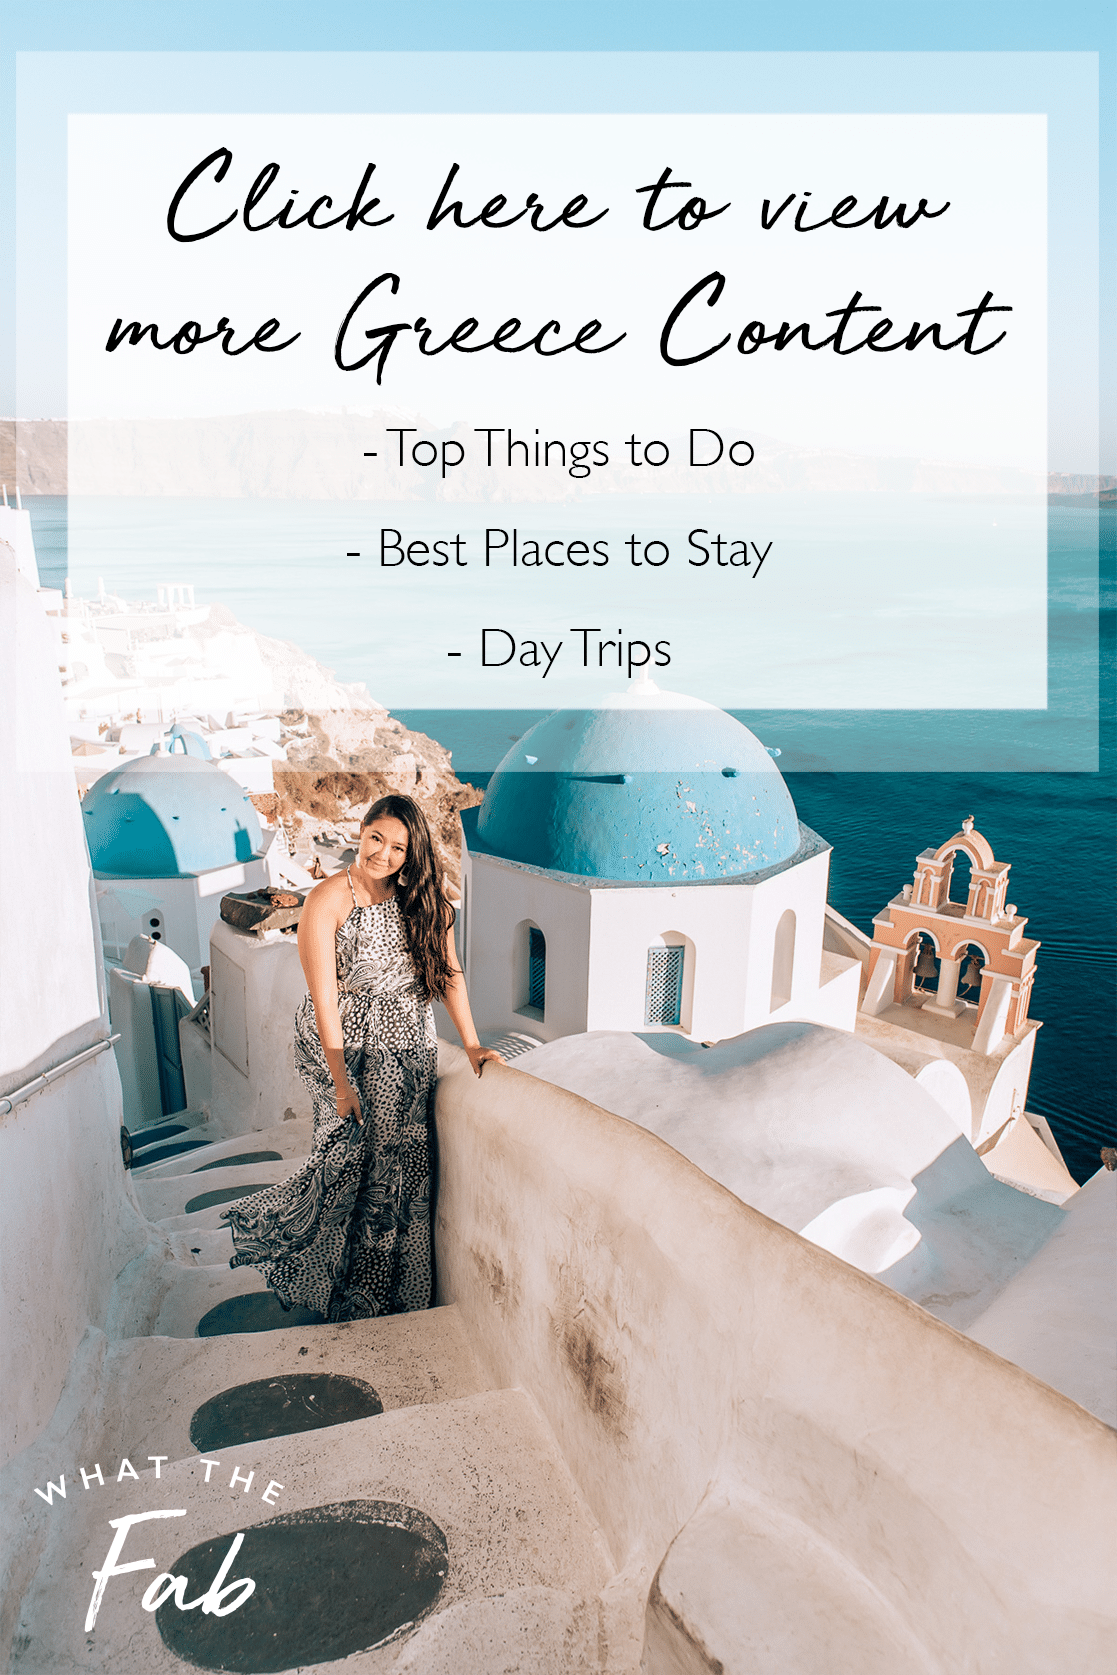 help planning a trip to greece